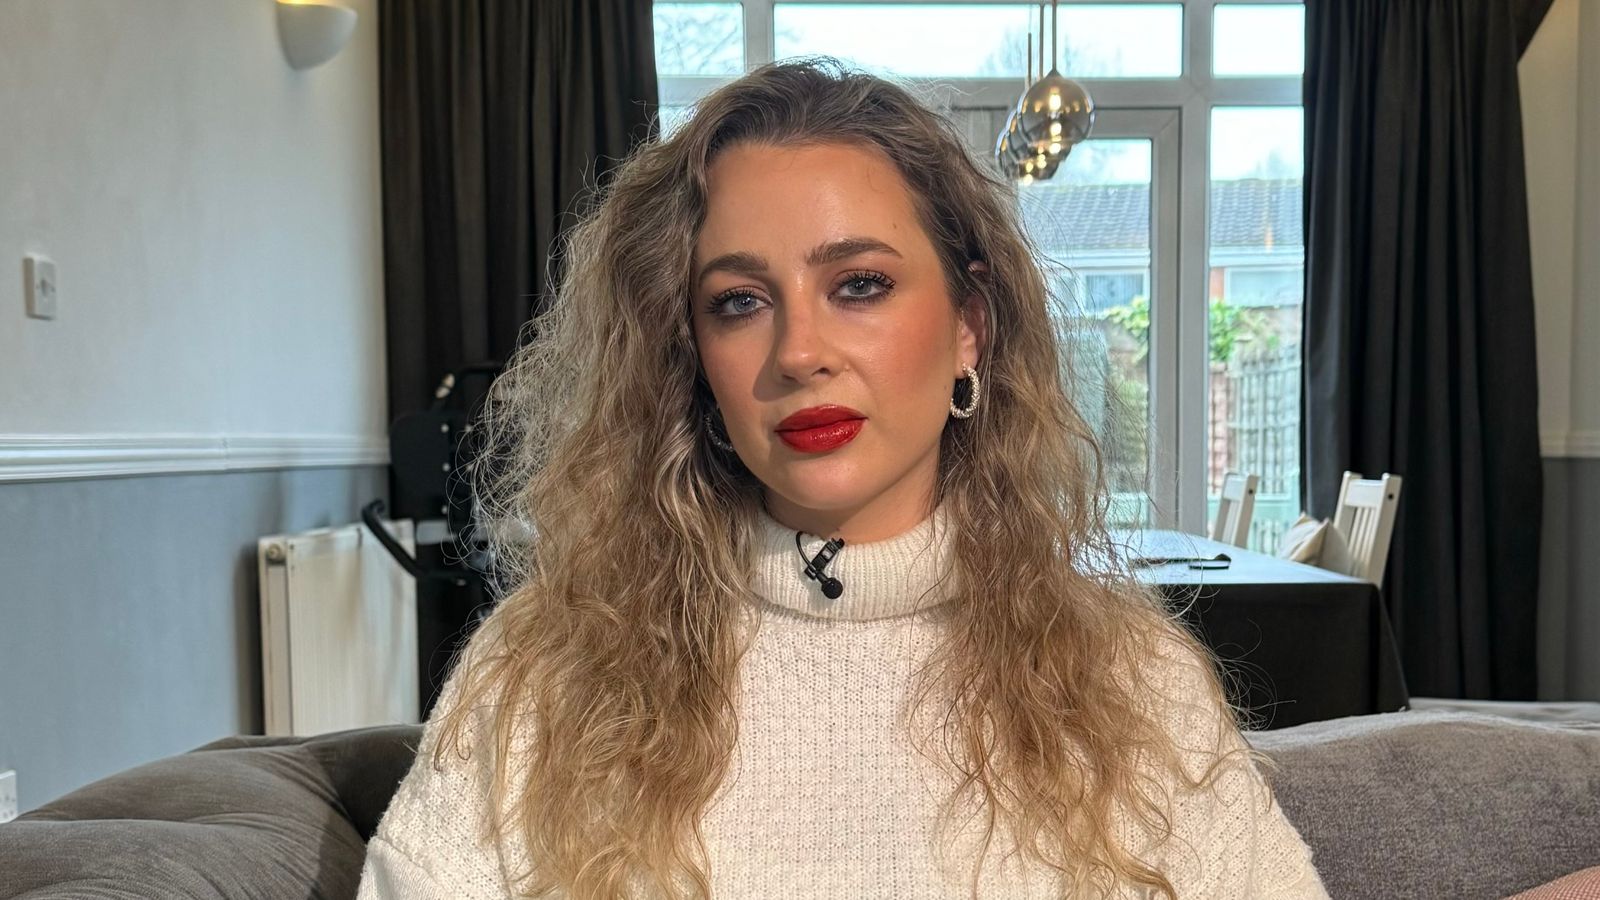 ‘I thought I was going mad’: Former make-up artist says she lost her job after being marked down by AI tool | Science & Tech News